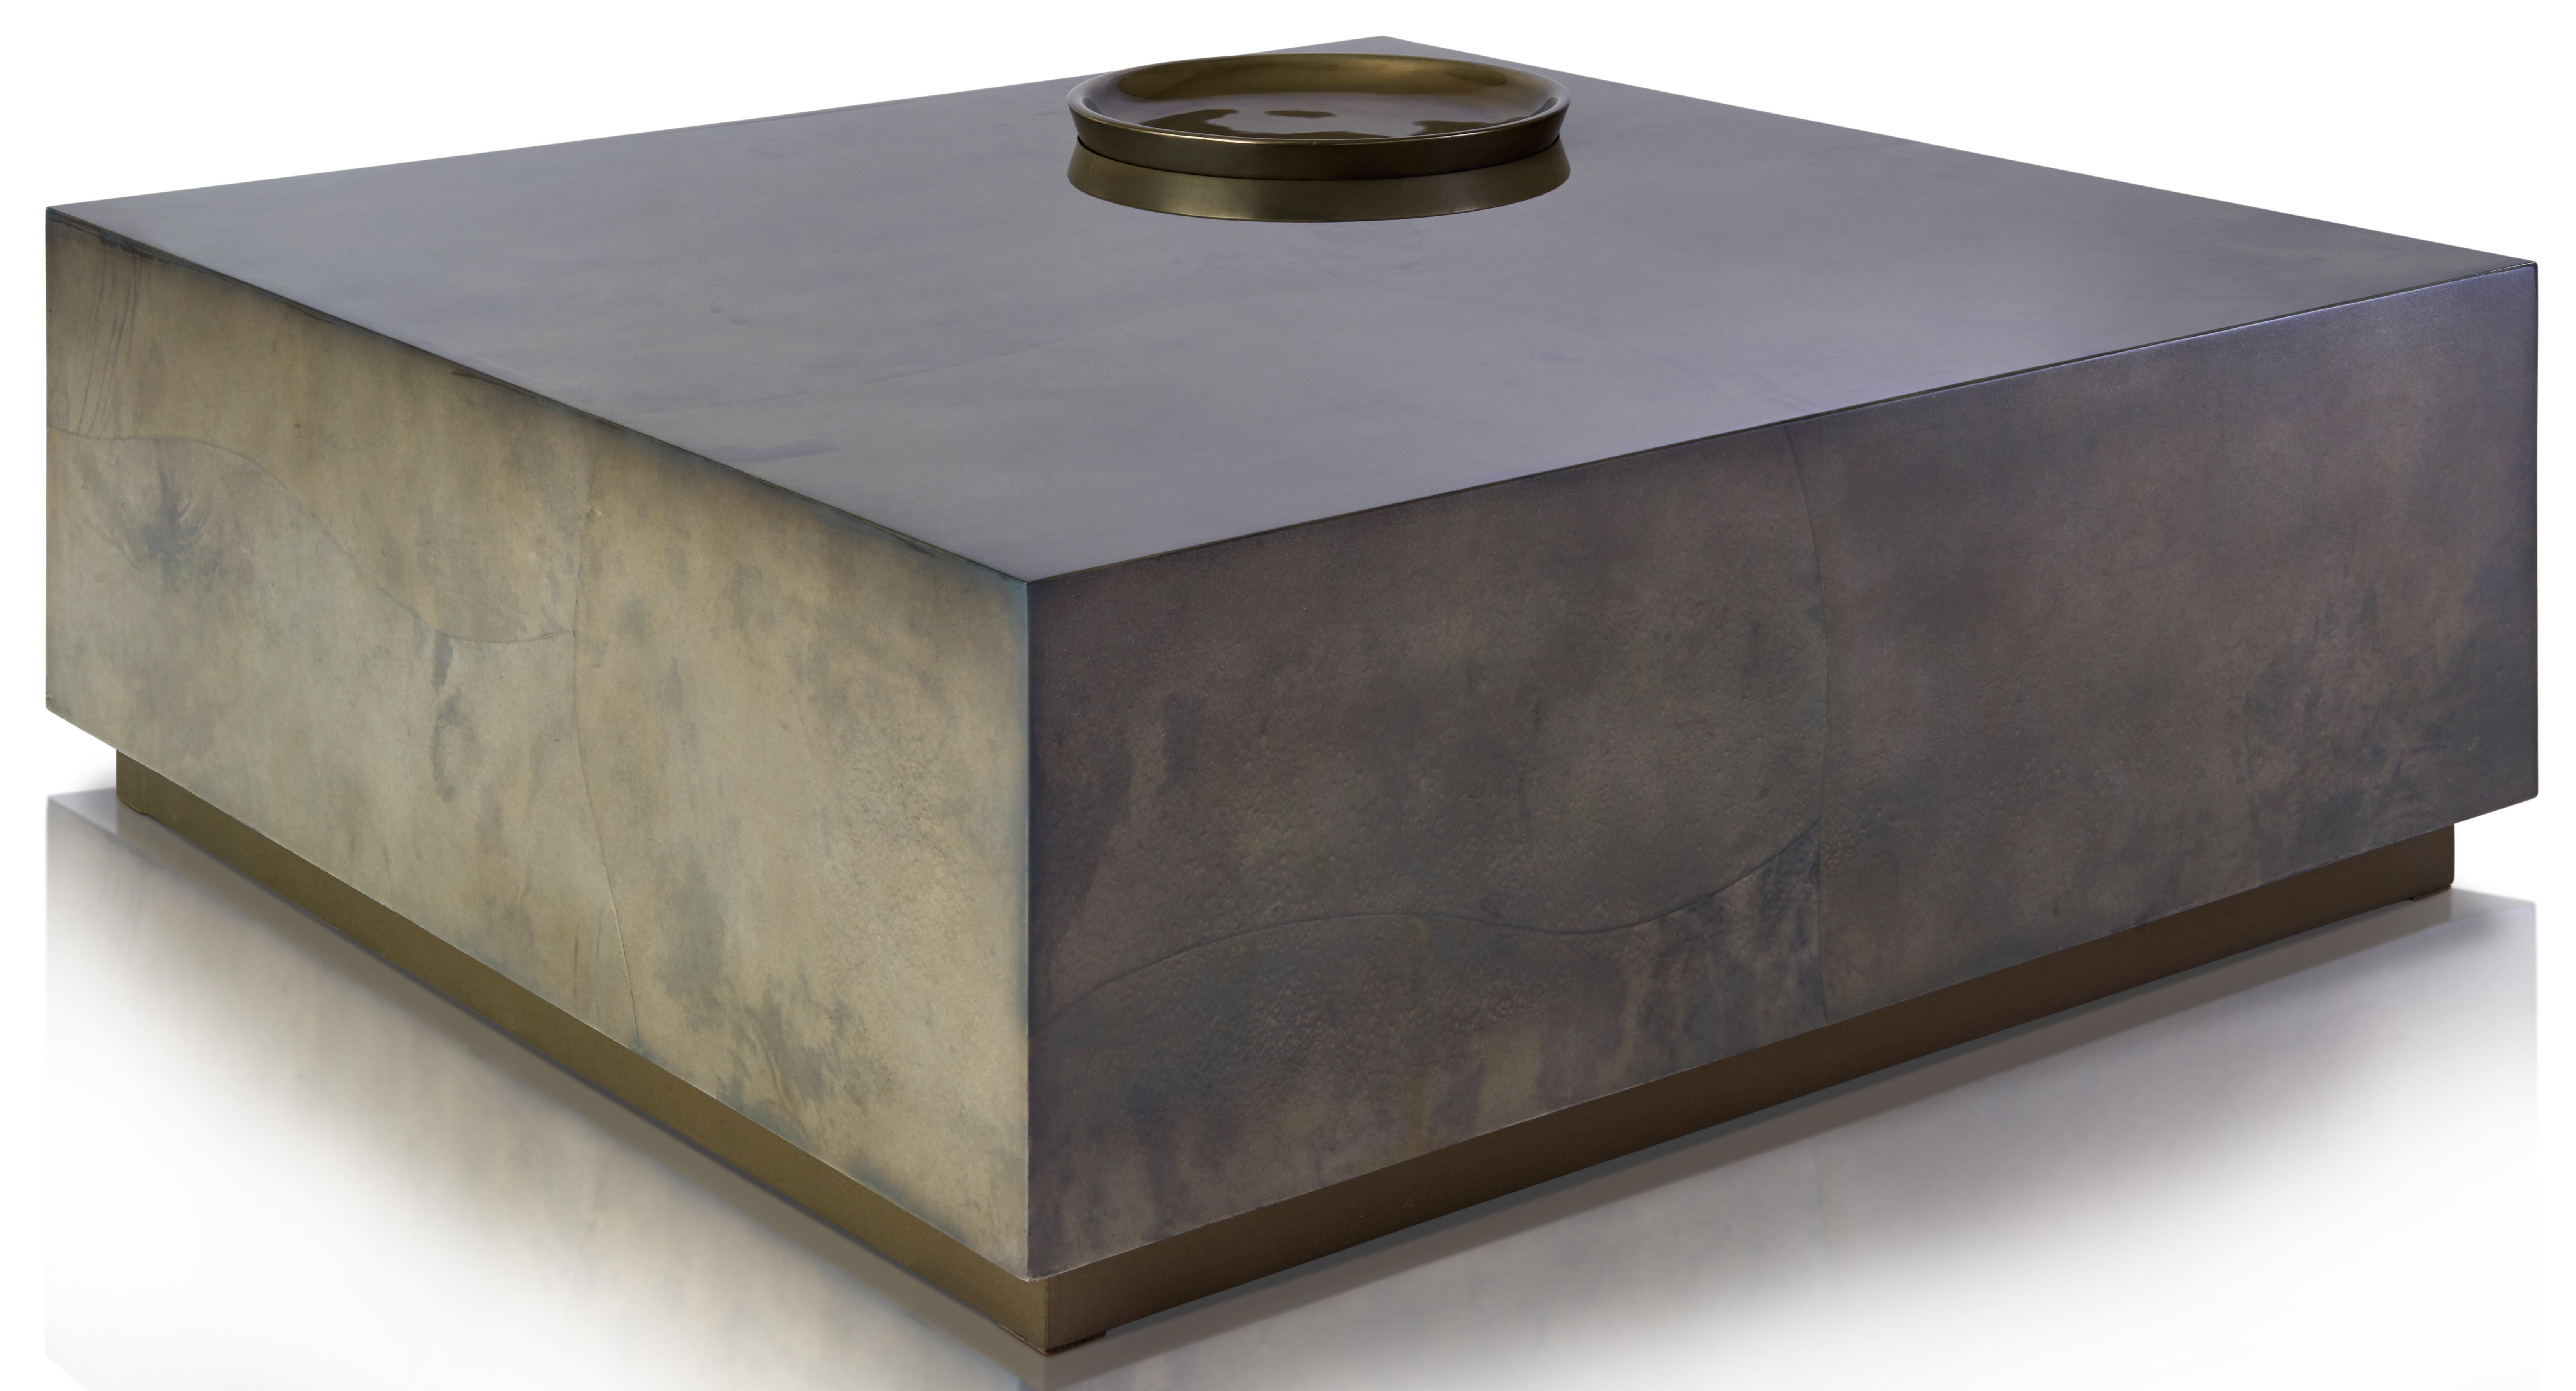 This chic coffee table is beautifully crafted by master artisans and features an inset sculptural bowl and trims in metallic pewter leaf. 

The classic aesthetic is finished with handcrafted parchment in midnight blue or moon shadow grey.